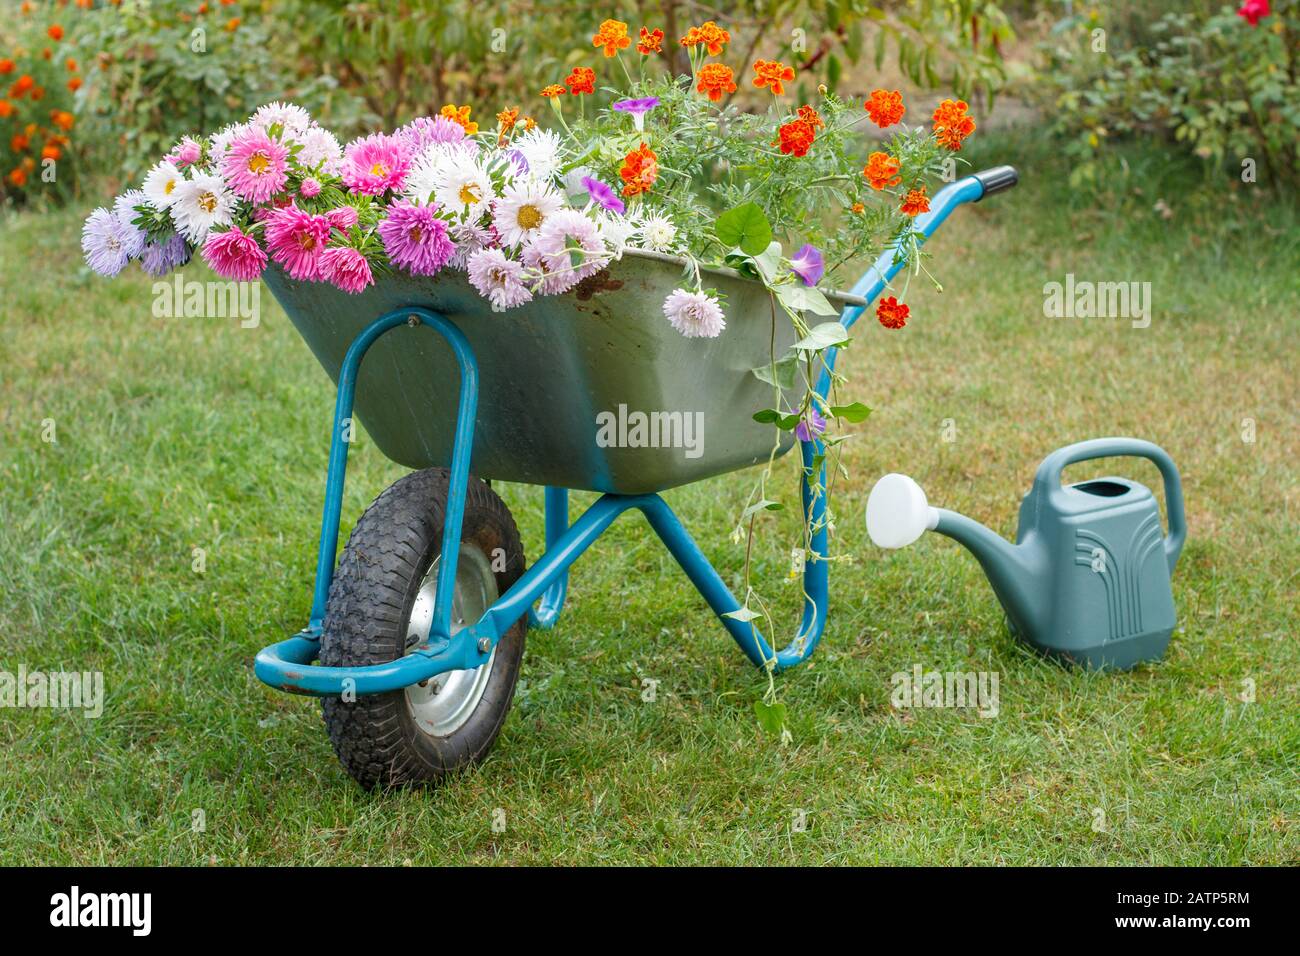 Morning after work in summer garden. Wheelbarrow with flowers, watering can on green grass. Stock Photo